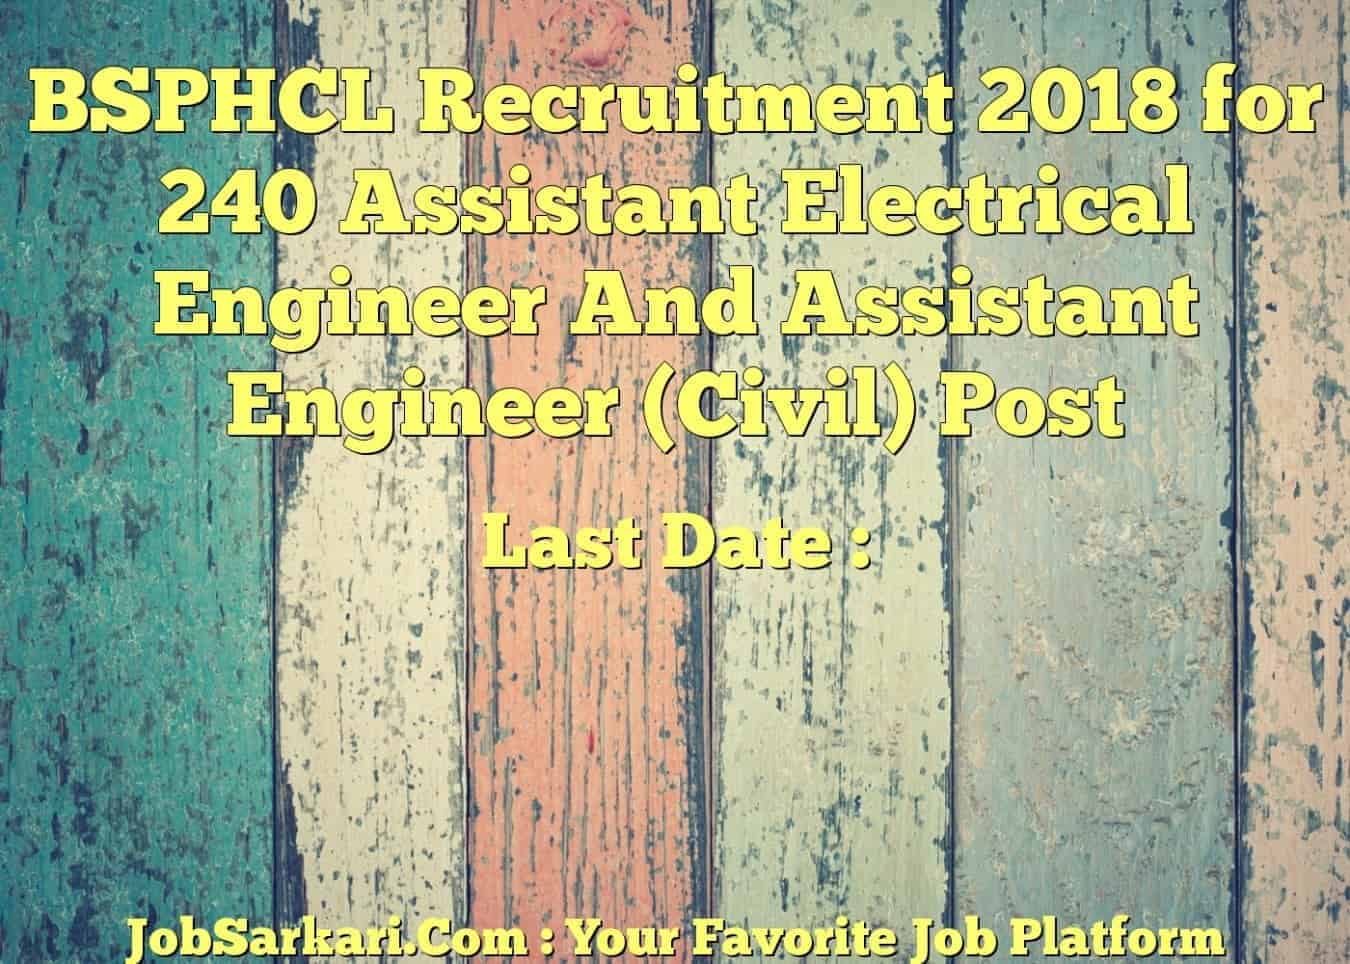 BSPHCL Recruitment 2018 for 240 Assistant Electrical Engineer And Assistant Engineer (Civil) Post